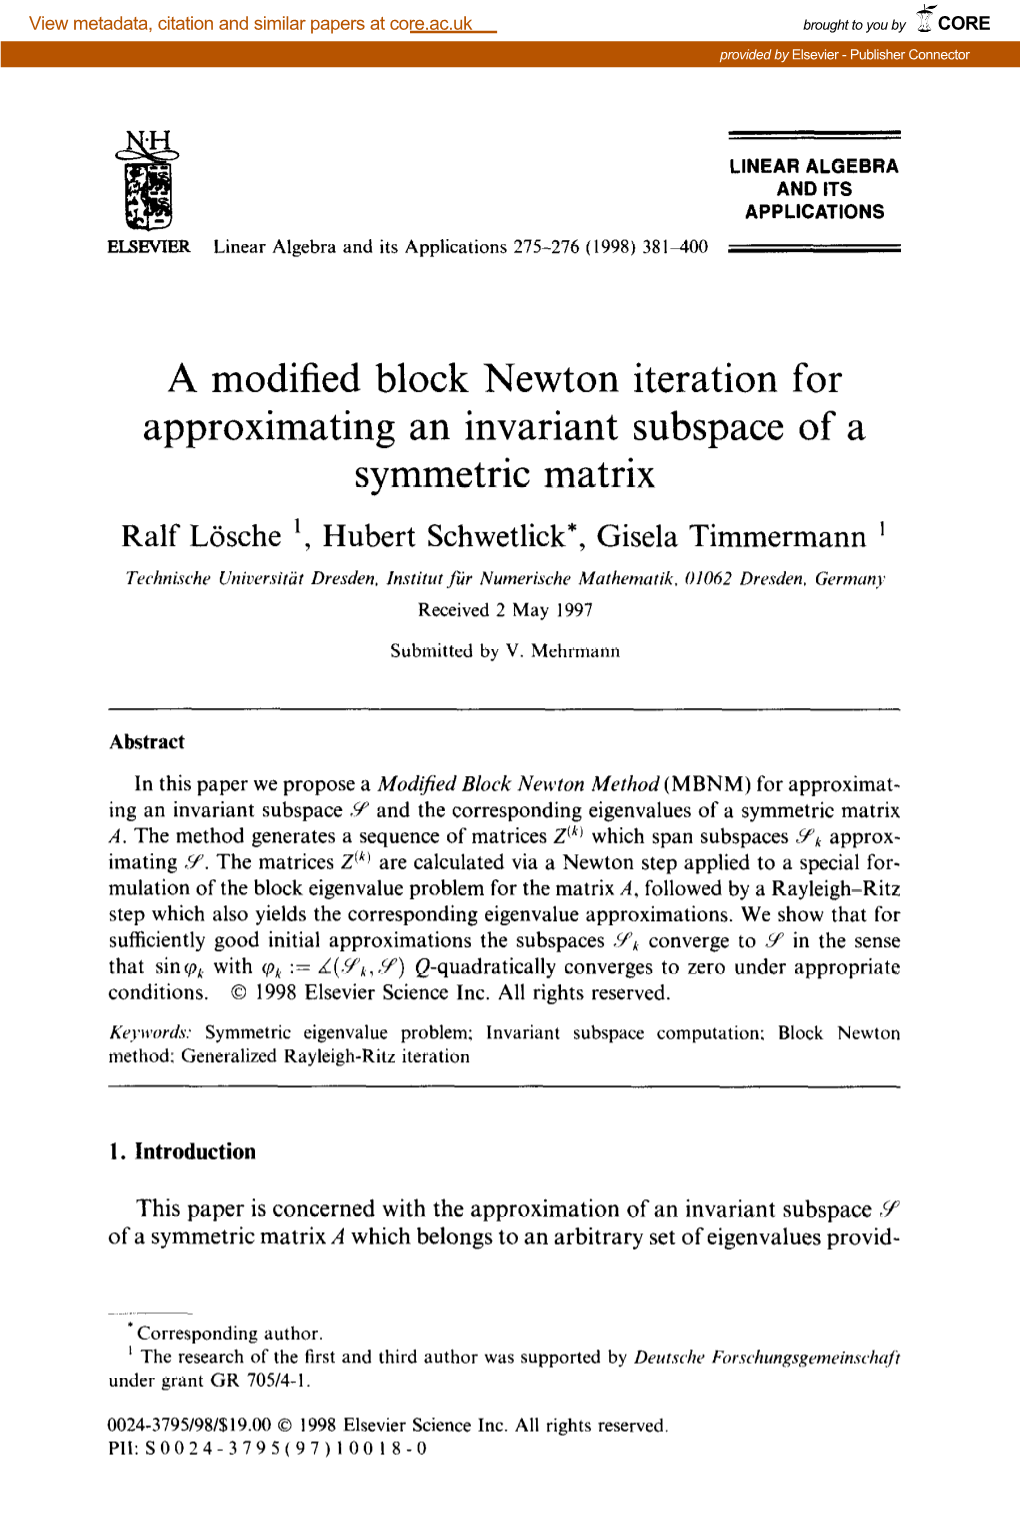 A Modified Block Newton Iteration for Approximating an Invariant Subspace of a Symmetric Matrix